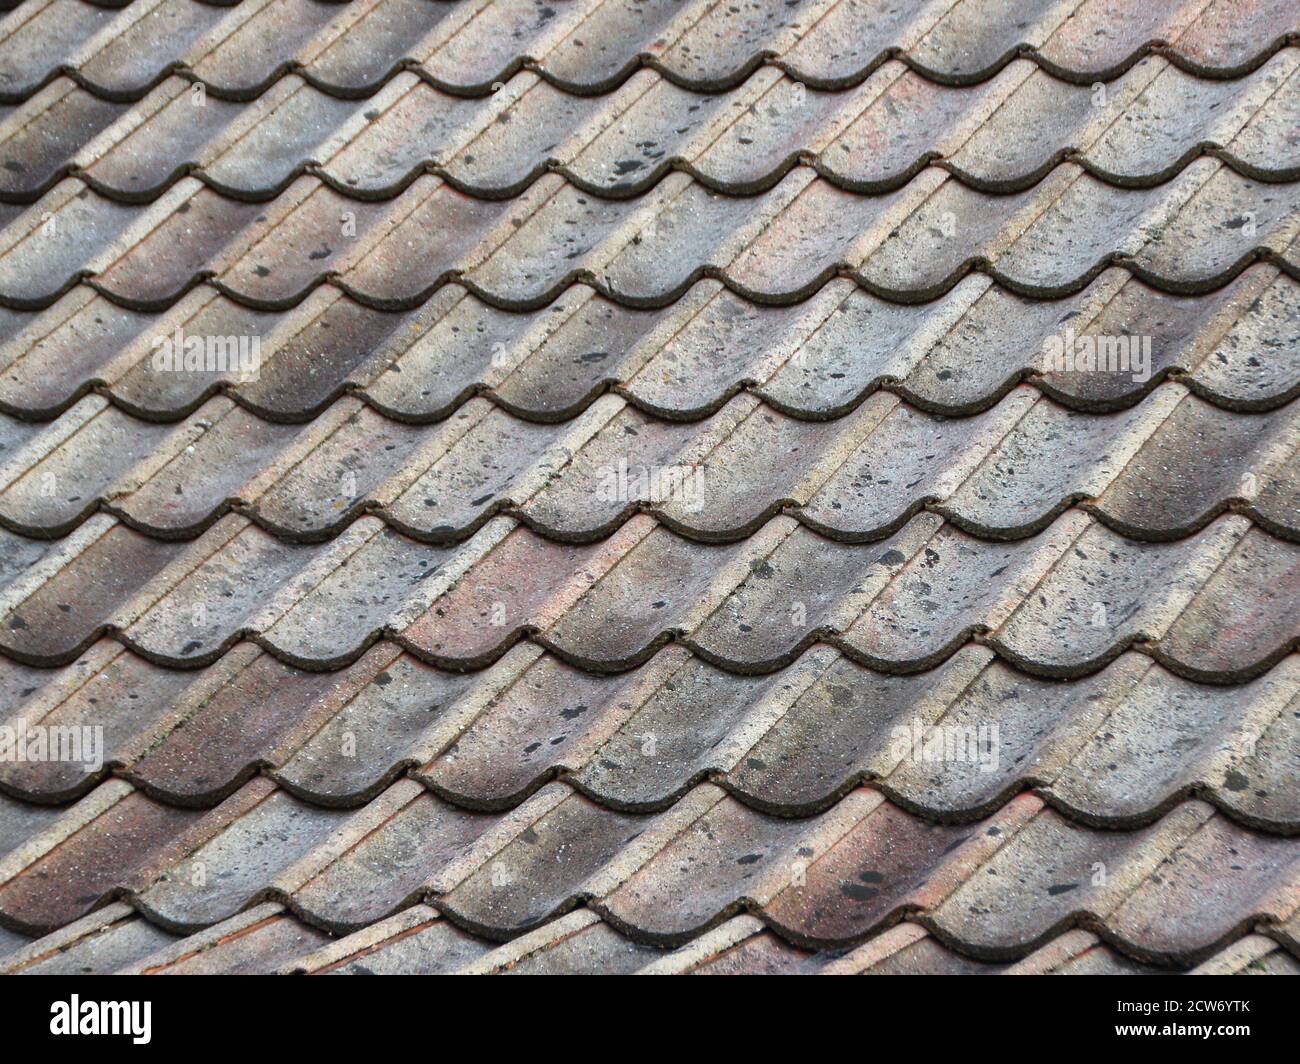 Worn cement roof tiles seen from a slanted angle. The colors are muted and only the roof of the house is seen. Stock Photo